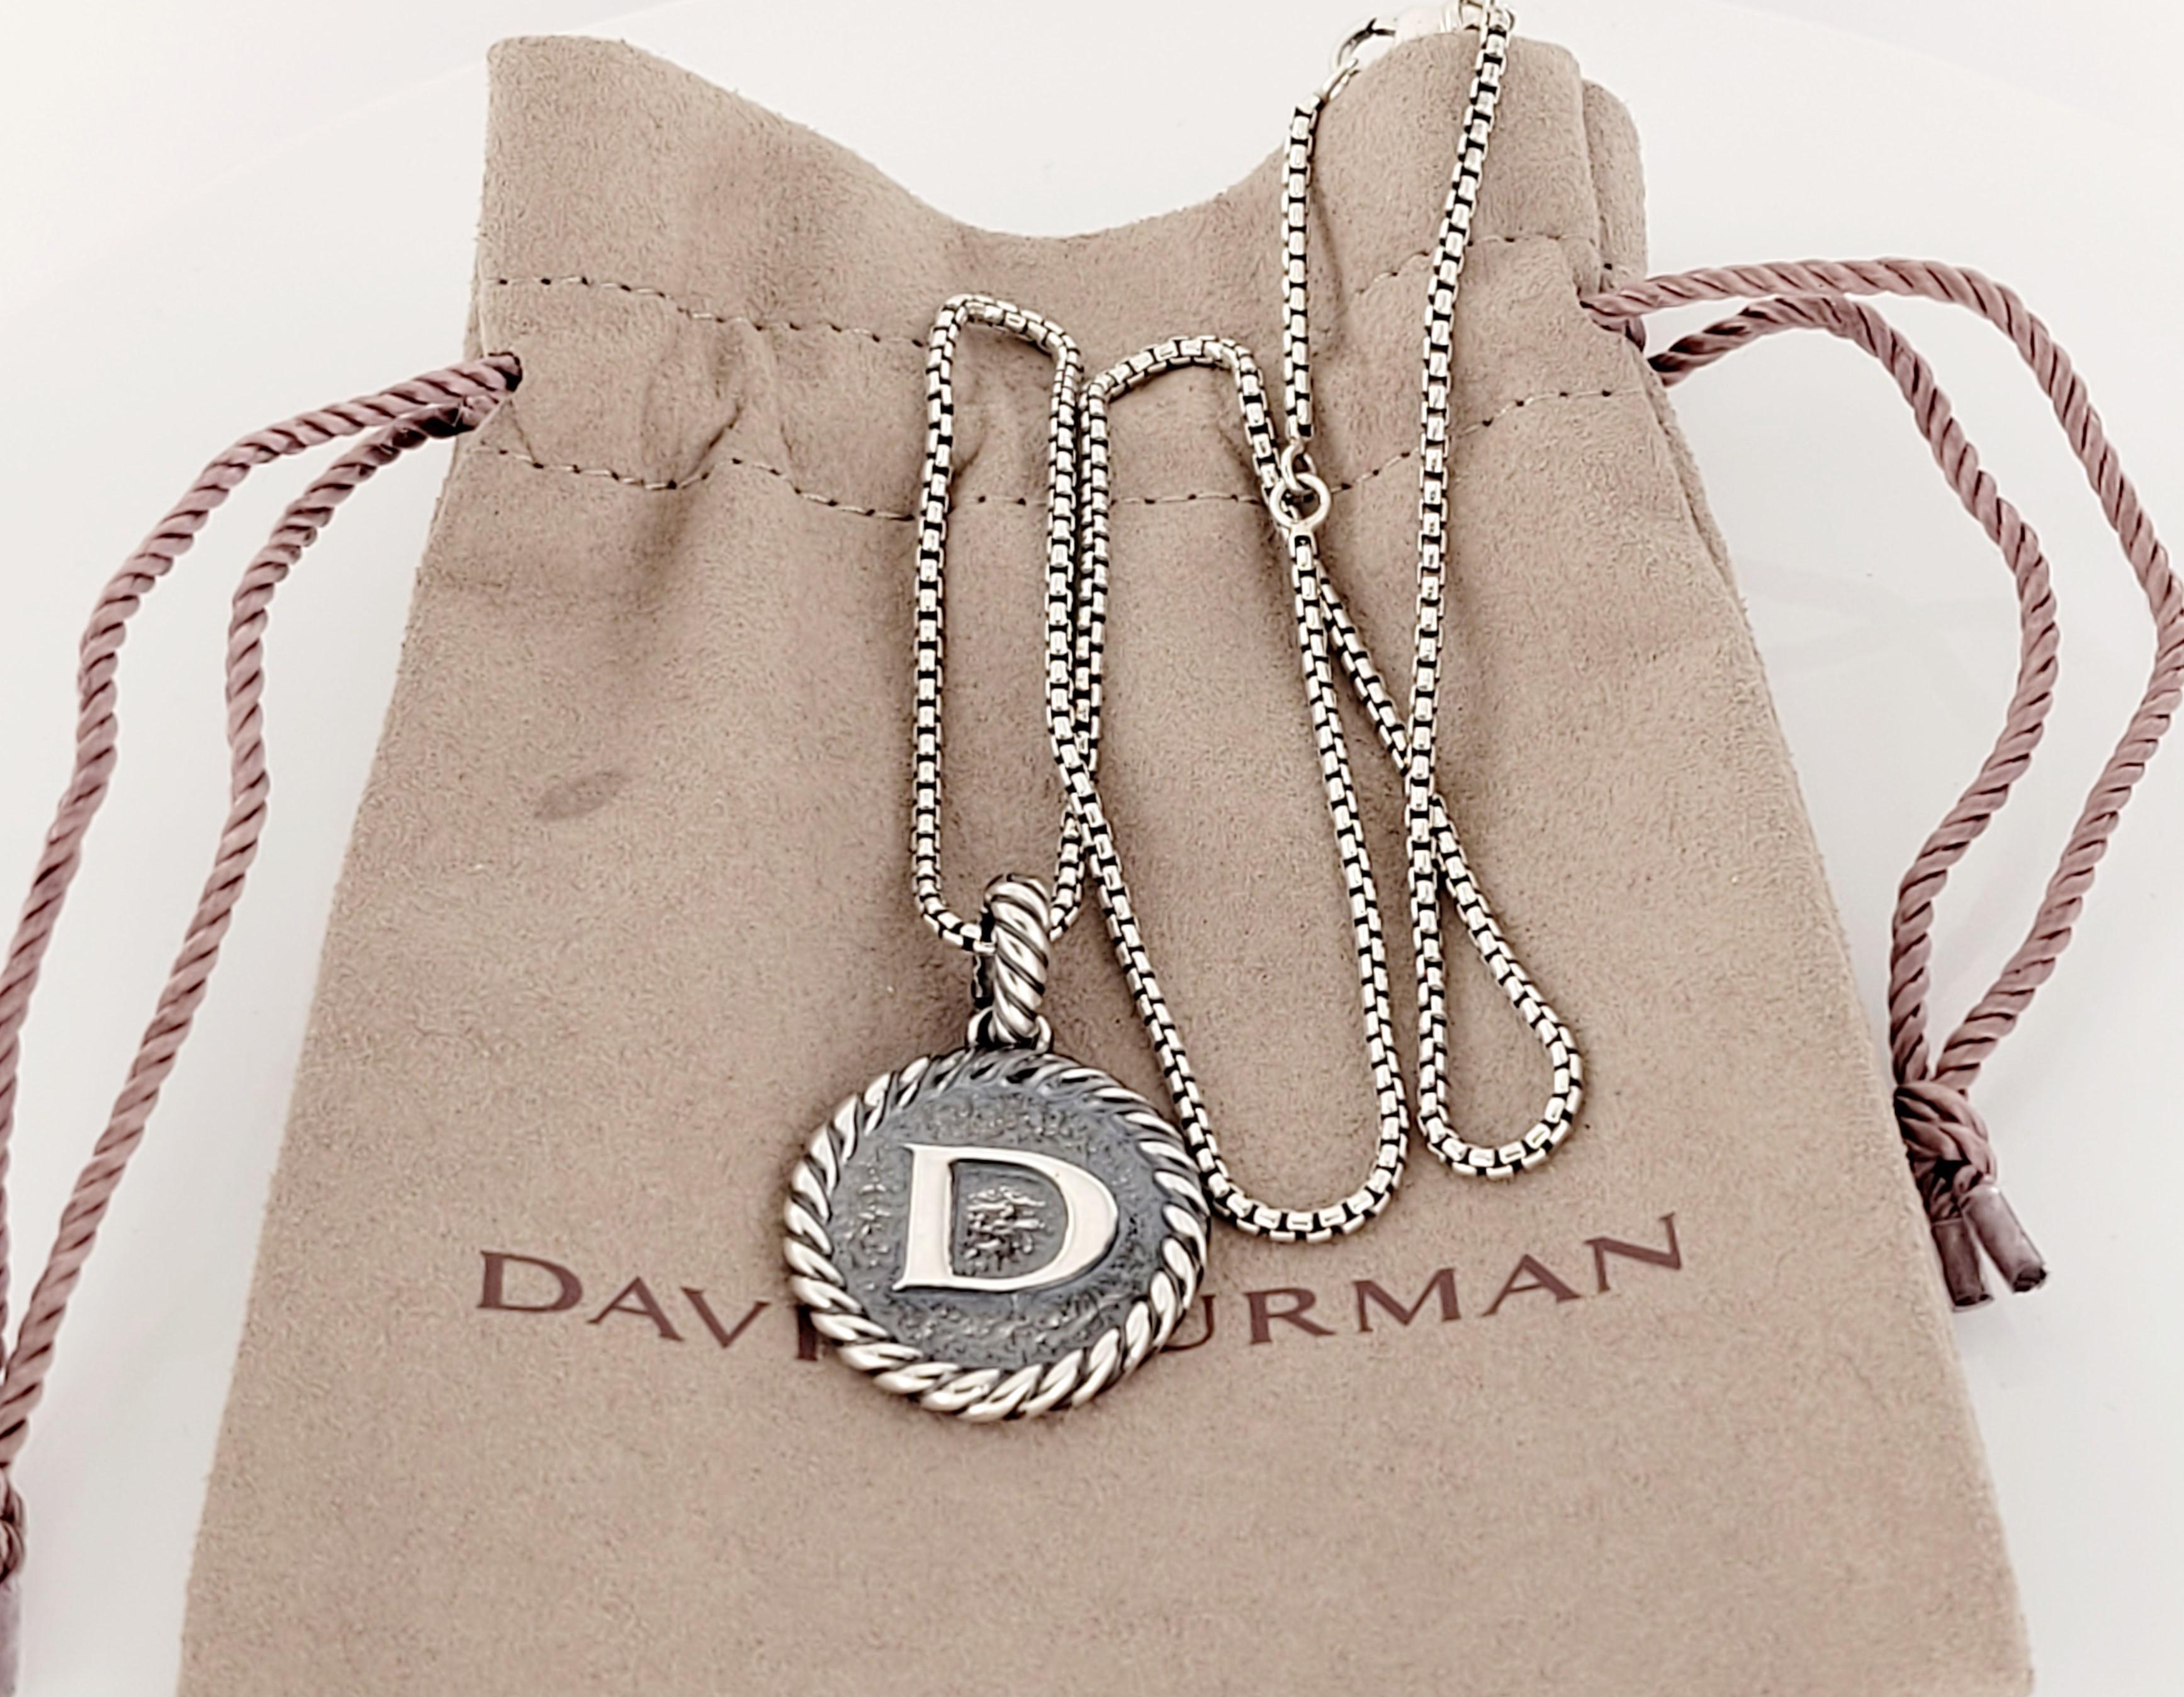 DAVID YURMAN Cable Collectibles D Initial Charm Pendant Enhancer sterling silver 
Pendant chain together 
Pendant shape round 23.8 x 23.8 
Chain length 17.5'' Long 
Chain Adjustable 16''  17.5''
Condition New, never worn 
Comes with David Yurman